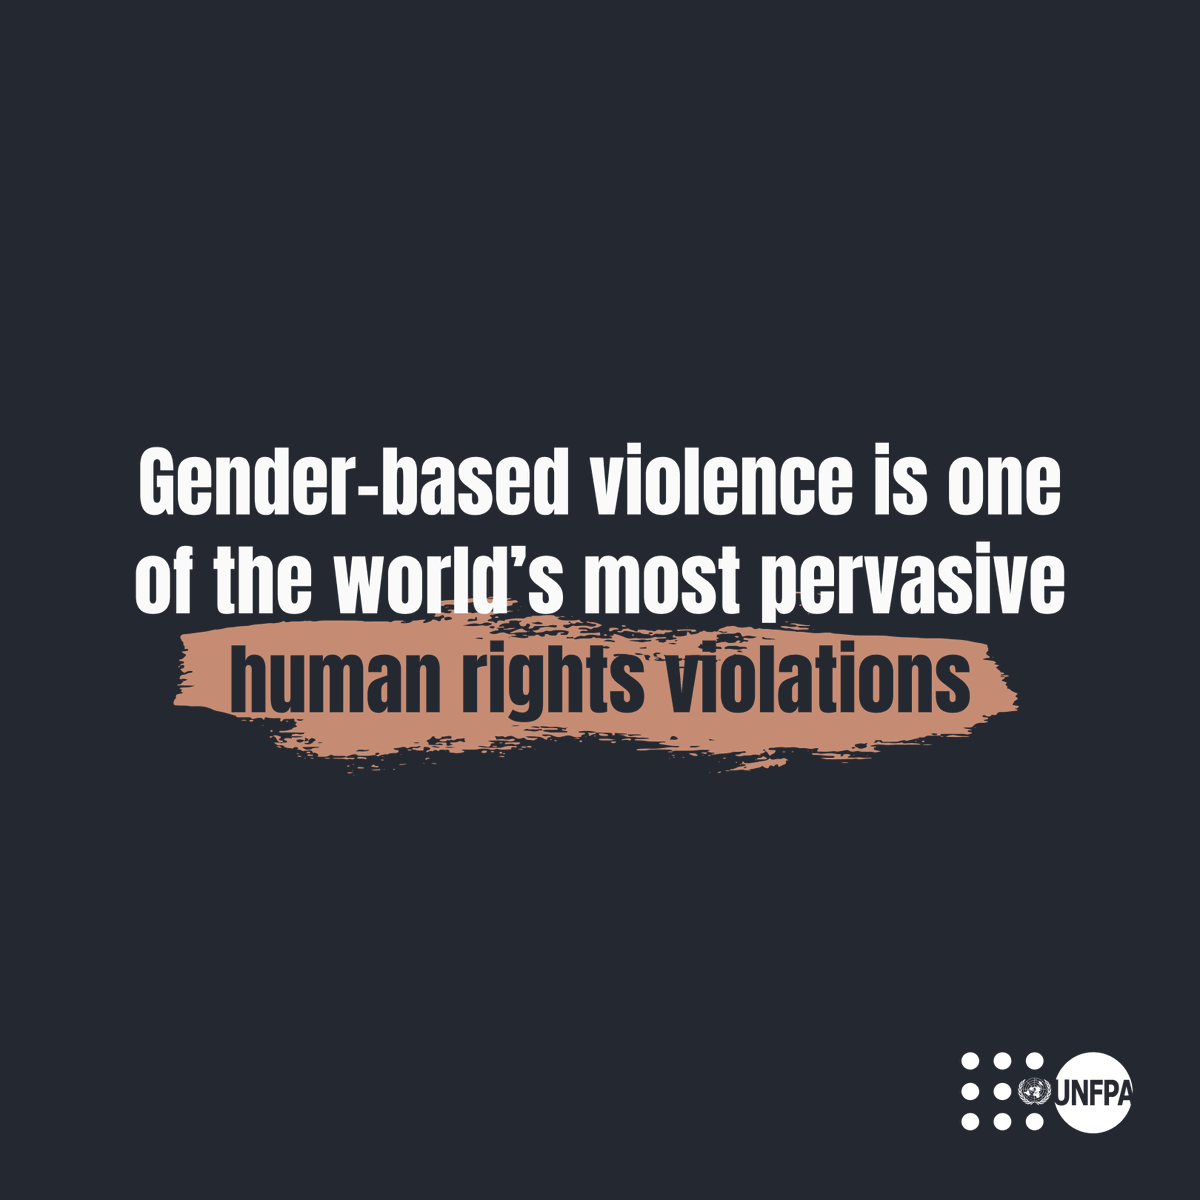 Join us in supporting the global 16 Days of Activism against Gender-Based Violence to end violence against women and girls. Together, let's raise awareness, advocate for change, and invest in prevention. #EndViolence #UNiTE2030